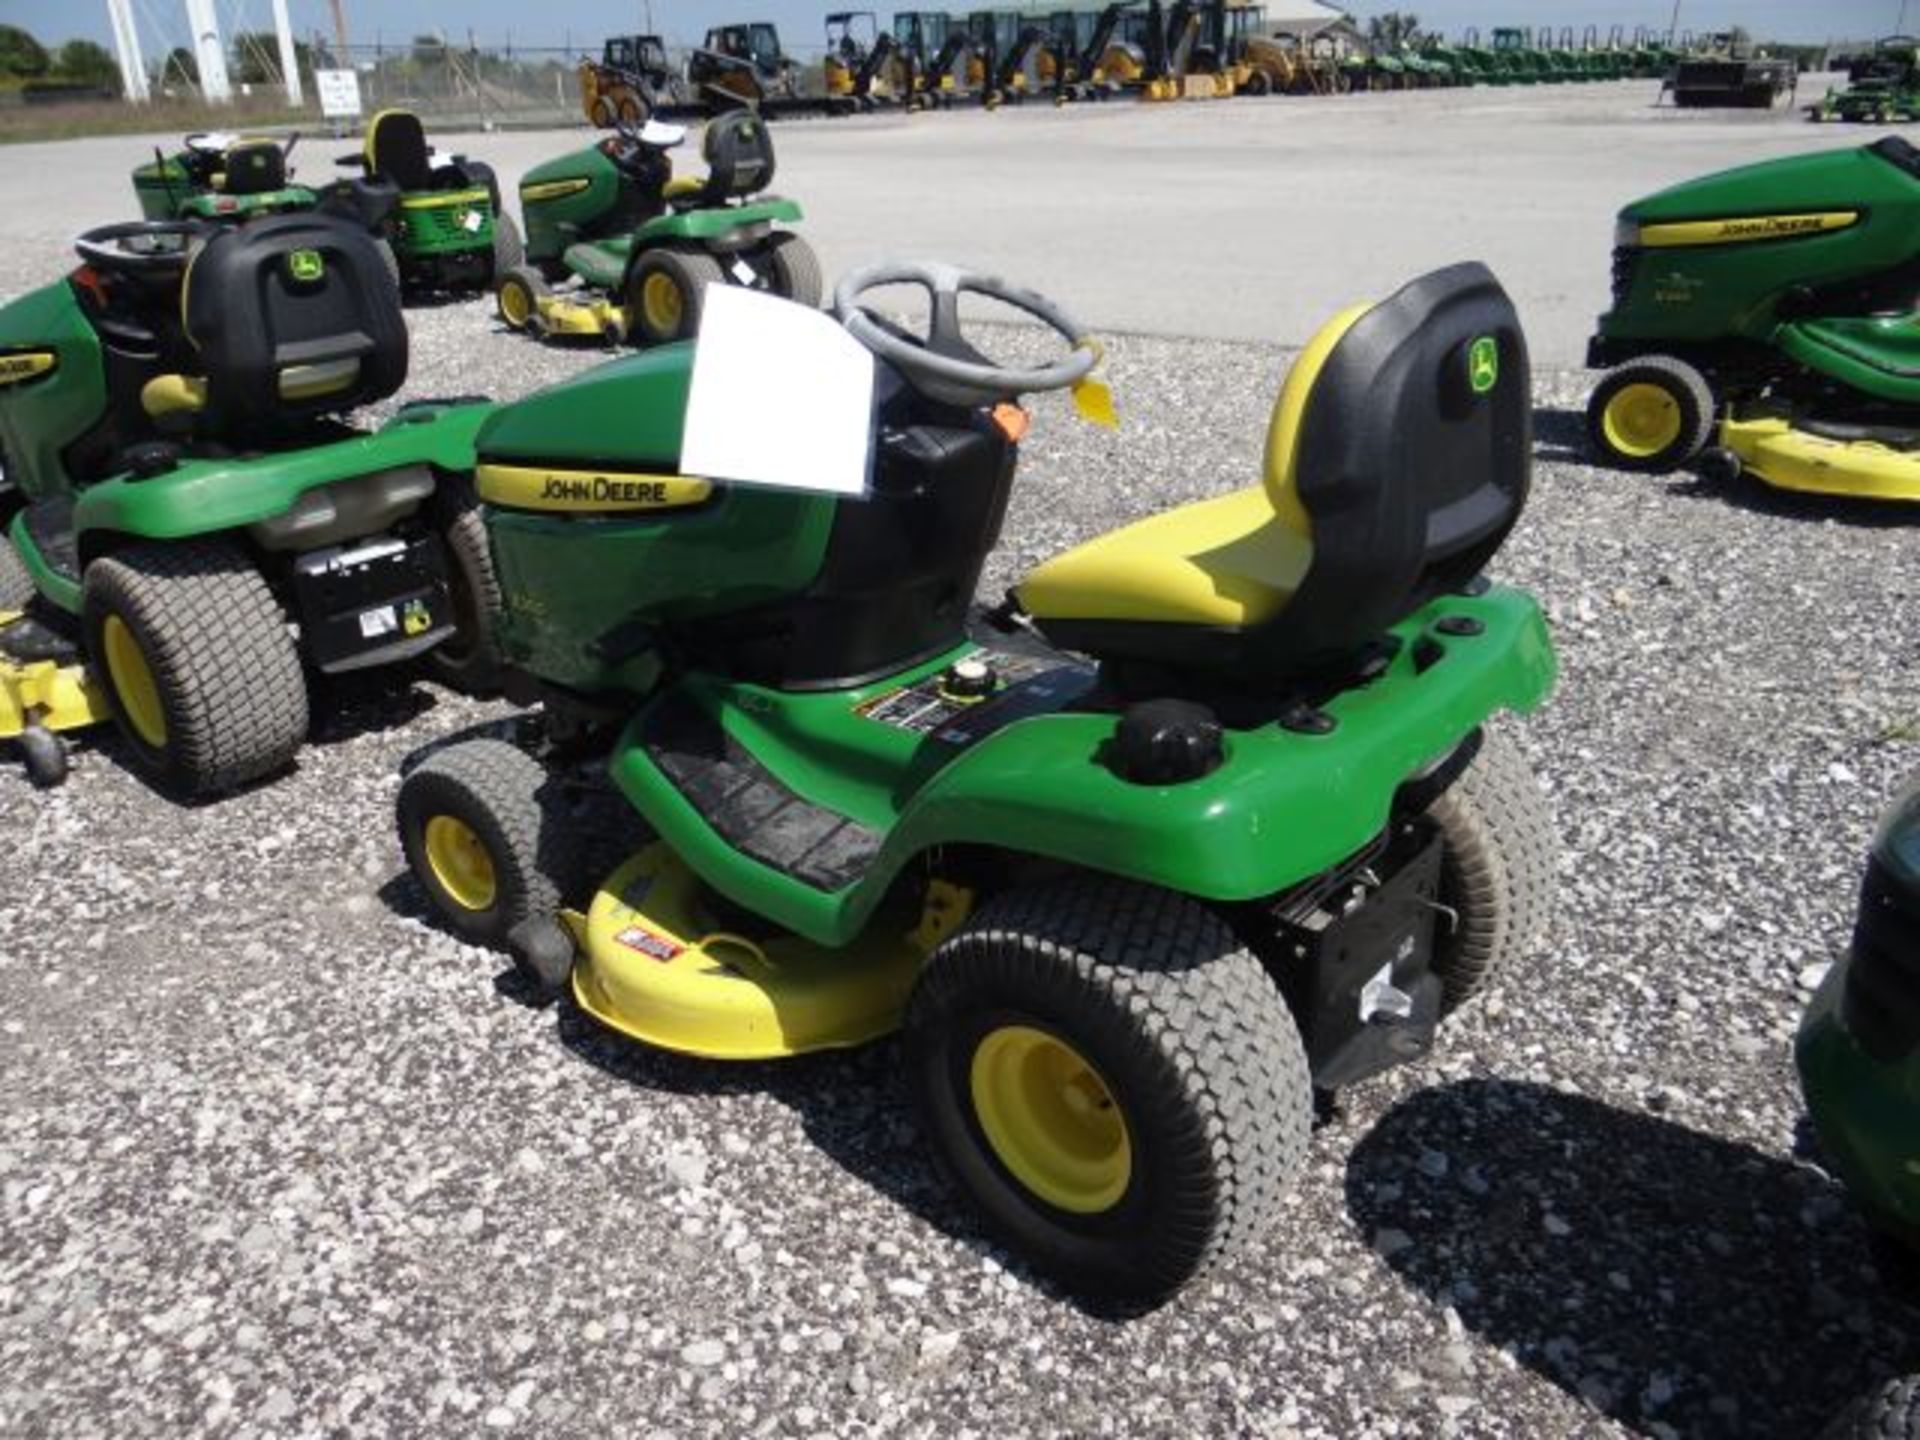 2007 JD X300 Mower 341 hrs, 17hp Kawasaki, V-Twin, Air Cooled, Hydro, w/ 42" Deck and 44" Front